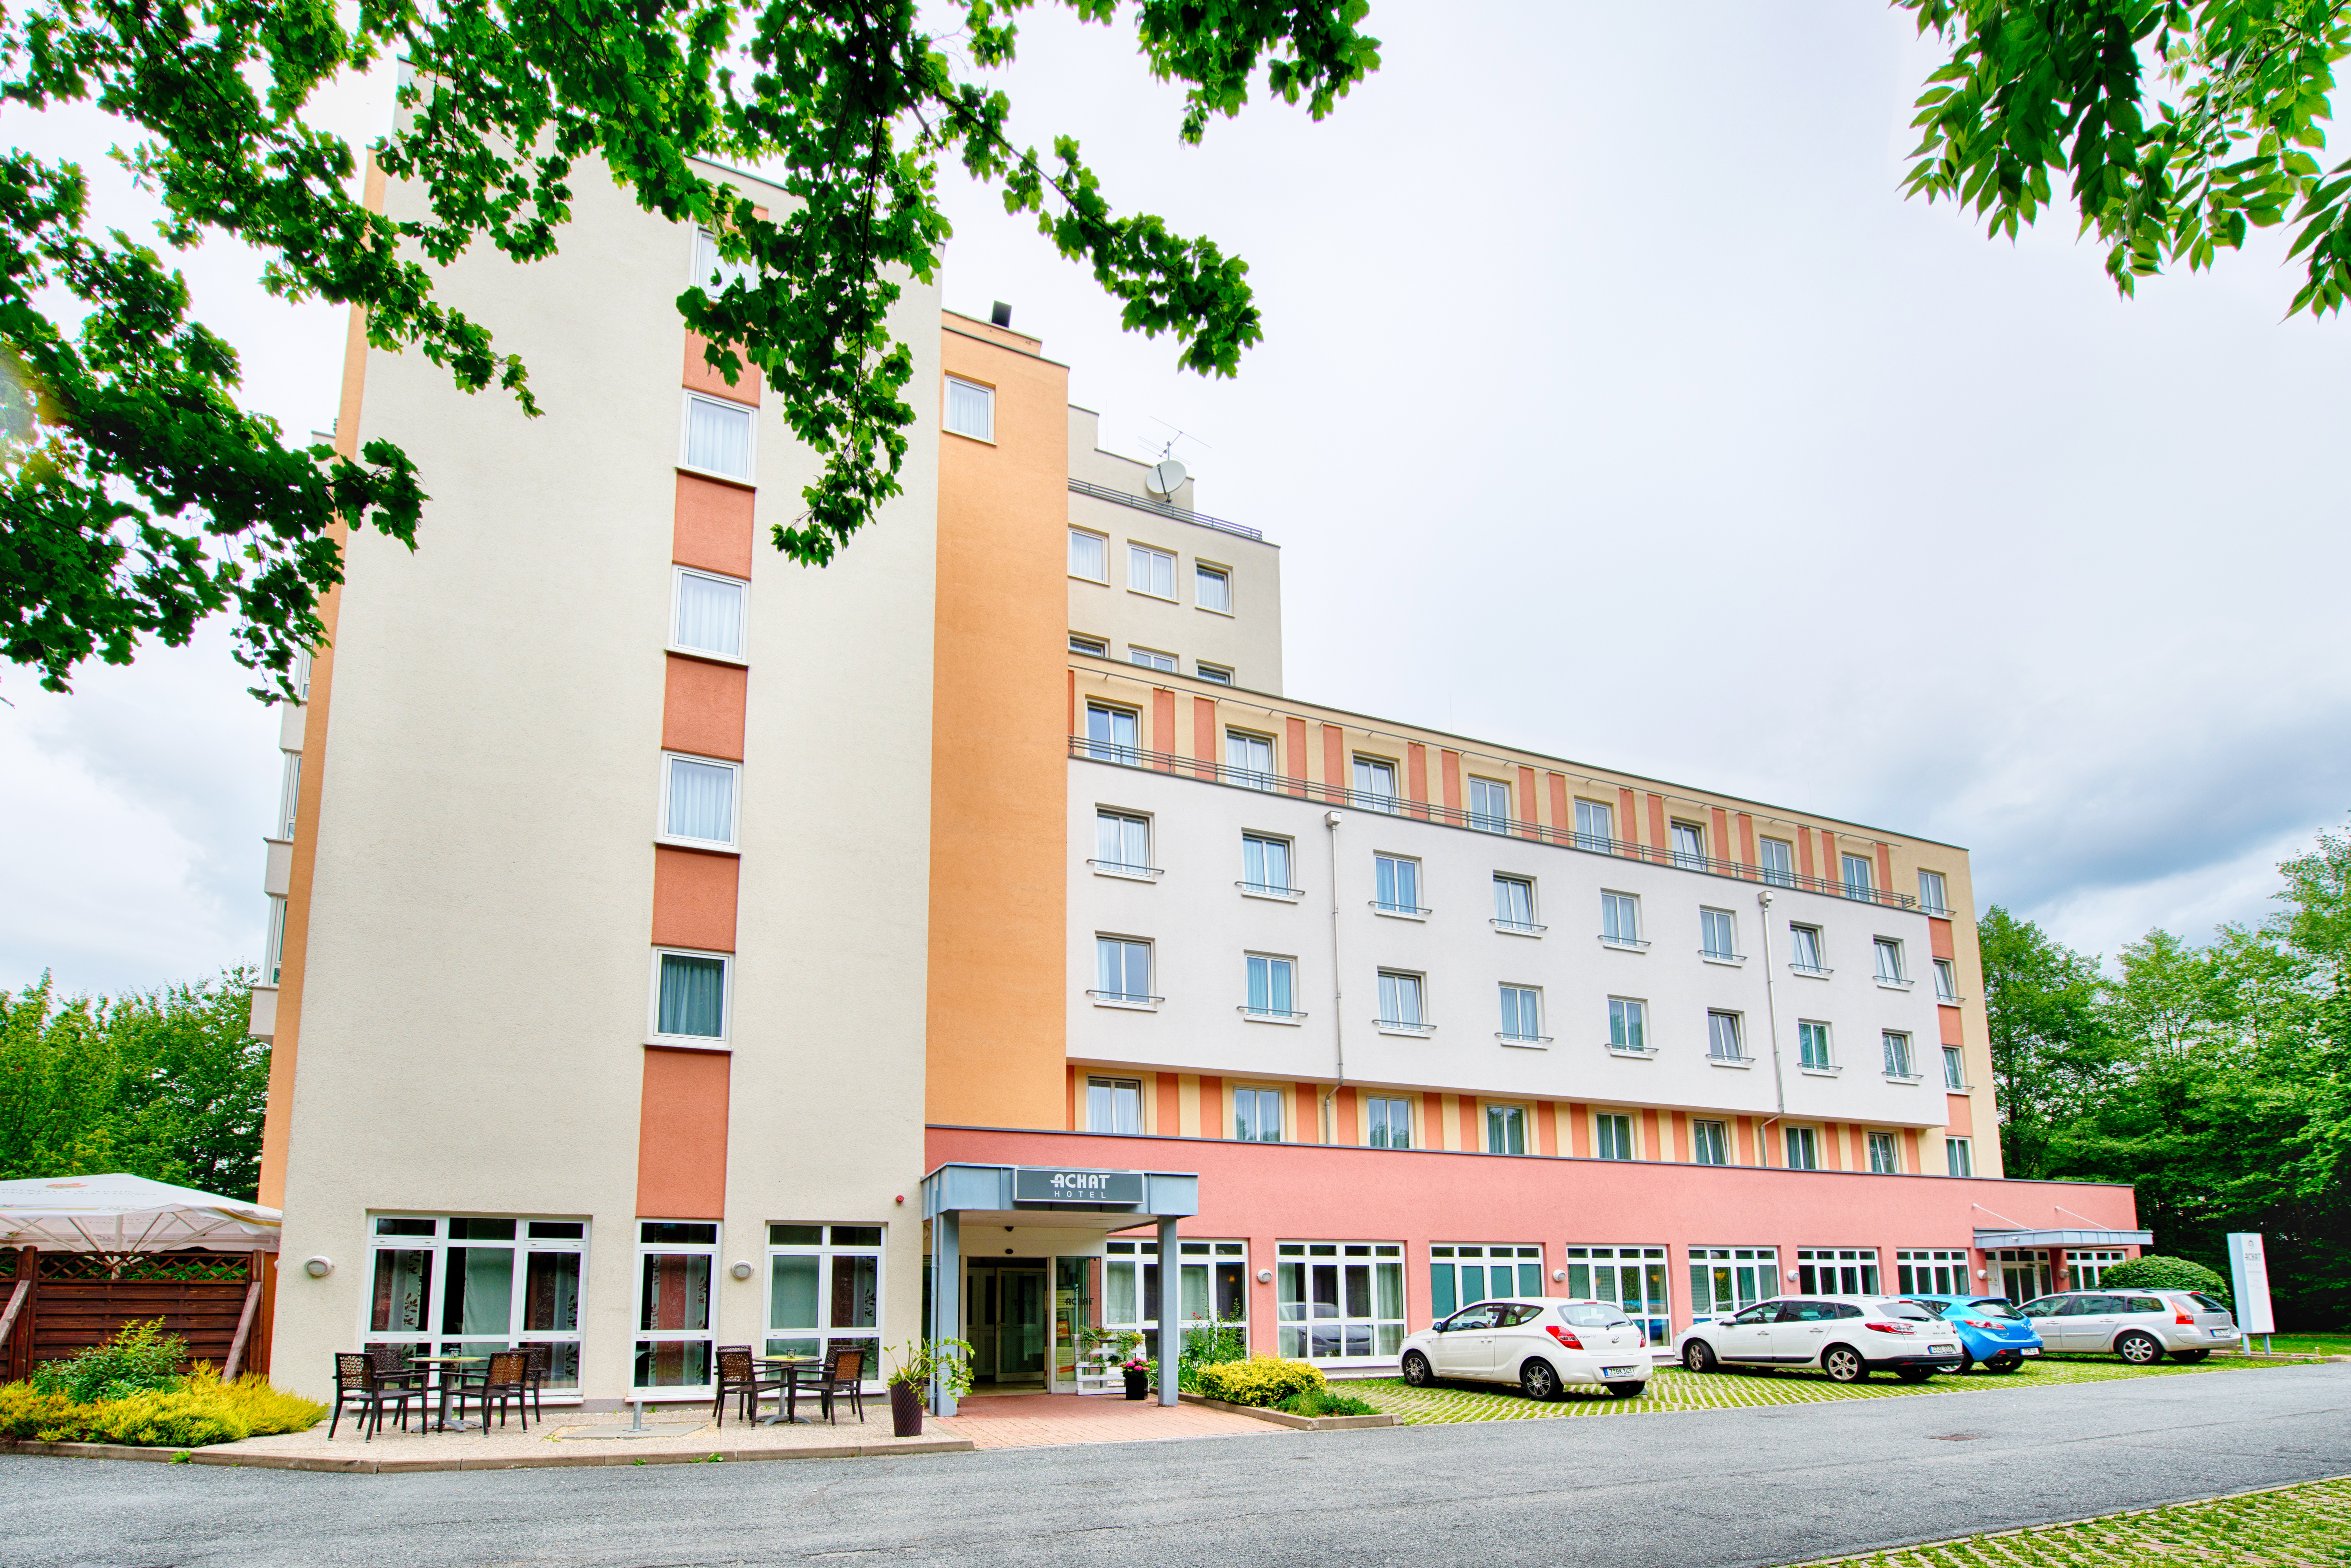 ACHAT Hotel Chemnitz <br/>65.00 ew <br/> <a href='http://vakantieoplossing.nl/outpage/?id=2328ea9a438cb28408a9c9641145bf67' target='_blank'>View Details</a>